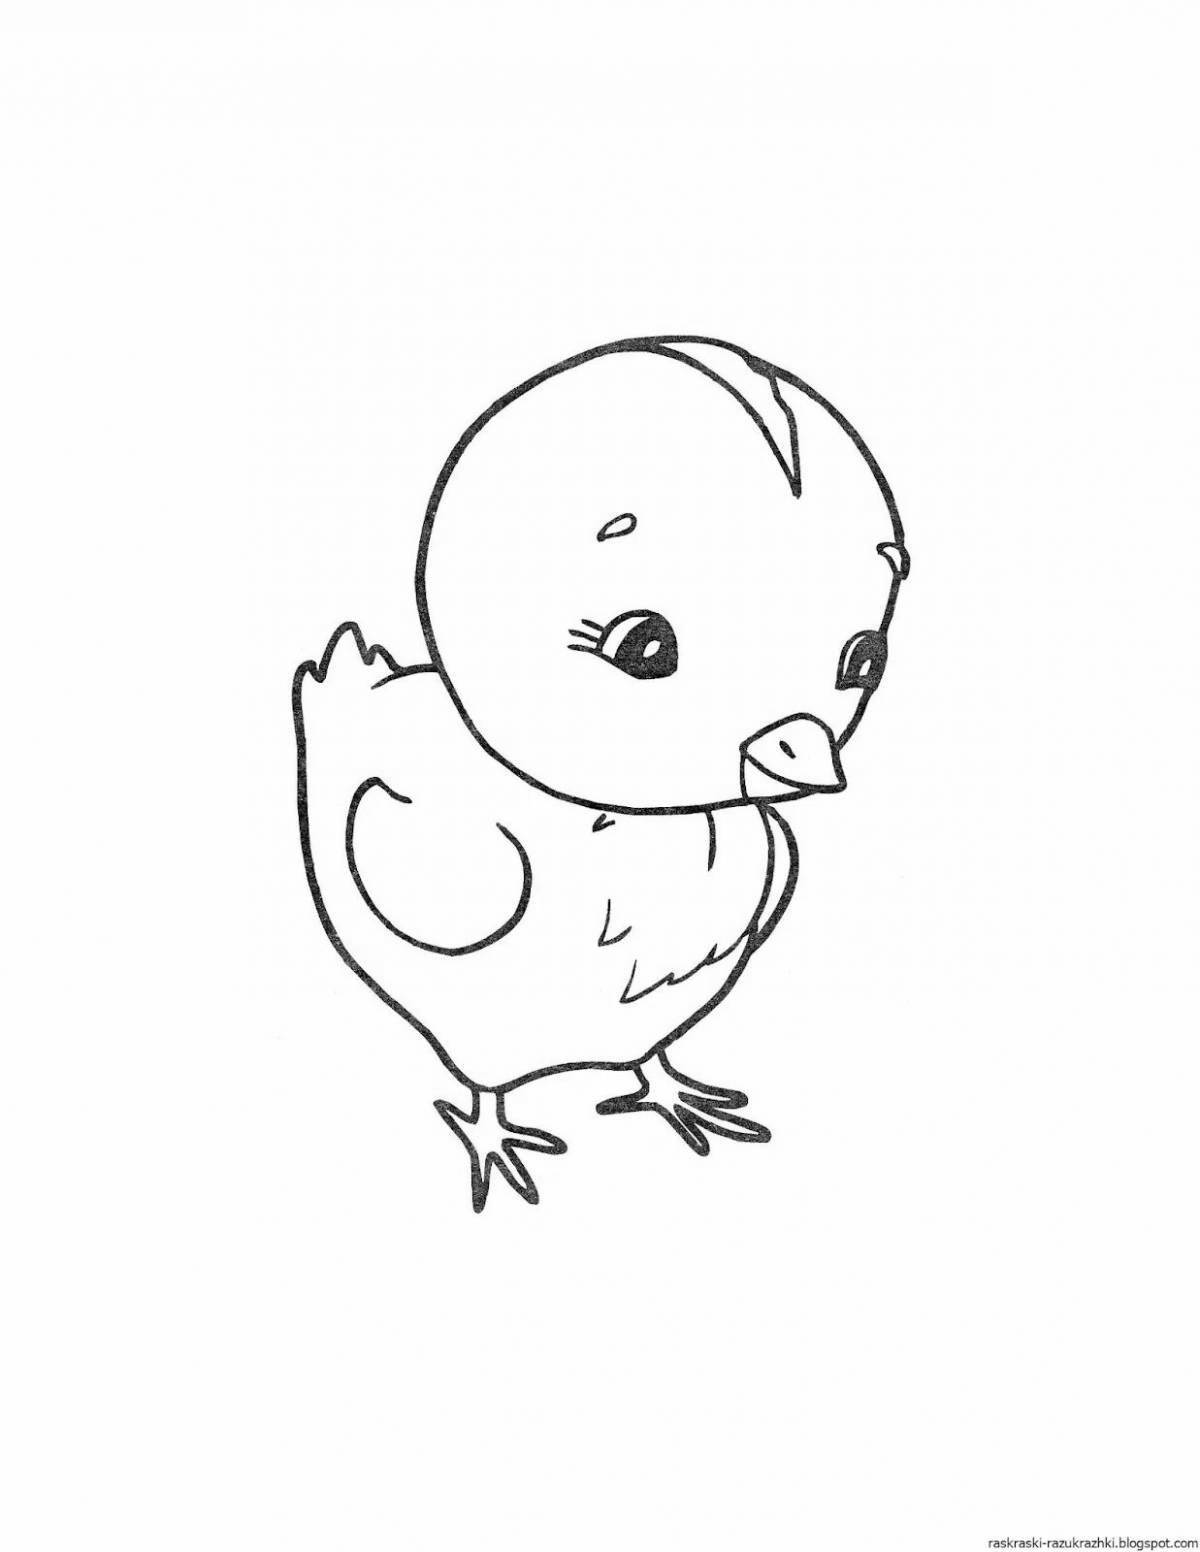 Chicken coloring page for kids